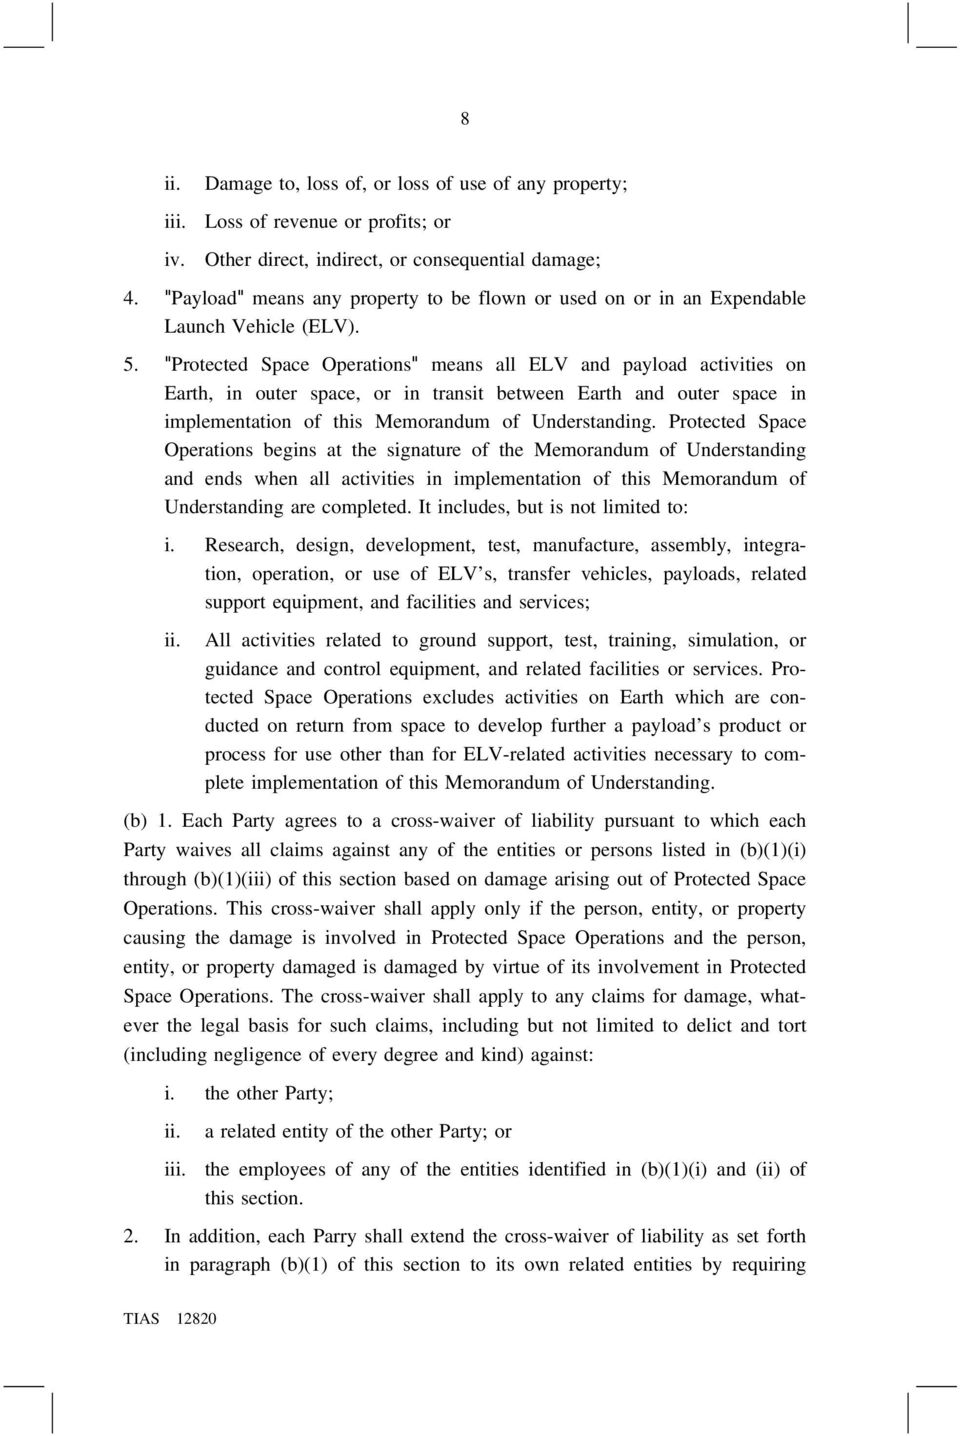 "Protected Space Operations" means all ELV and payload activities on Earth, in outer space, or in transit between Earth and outer space in implementation of this Memorandum of Understanding.